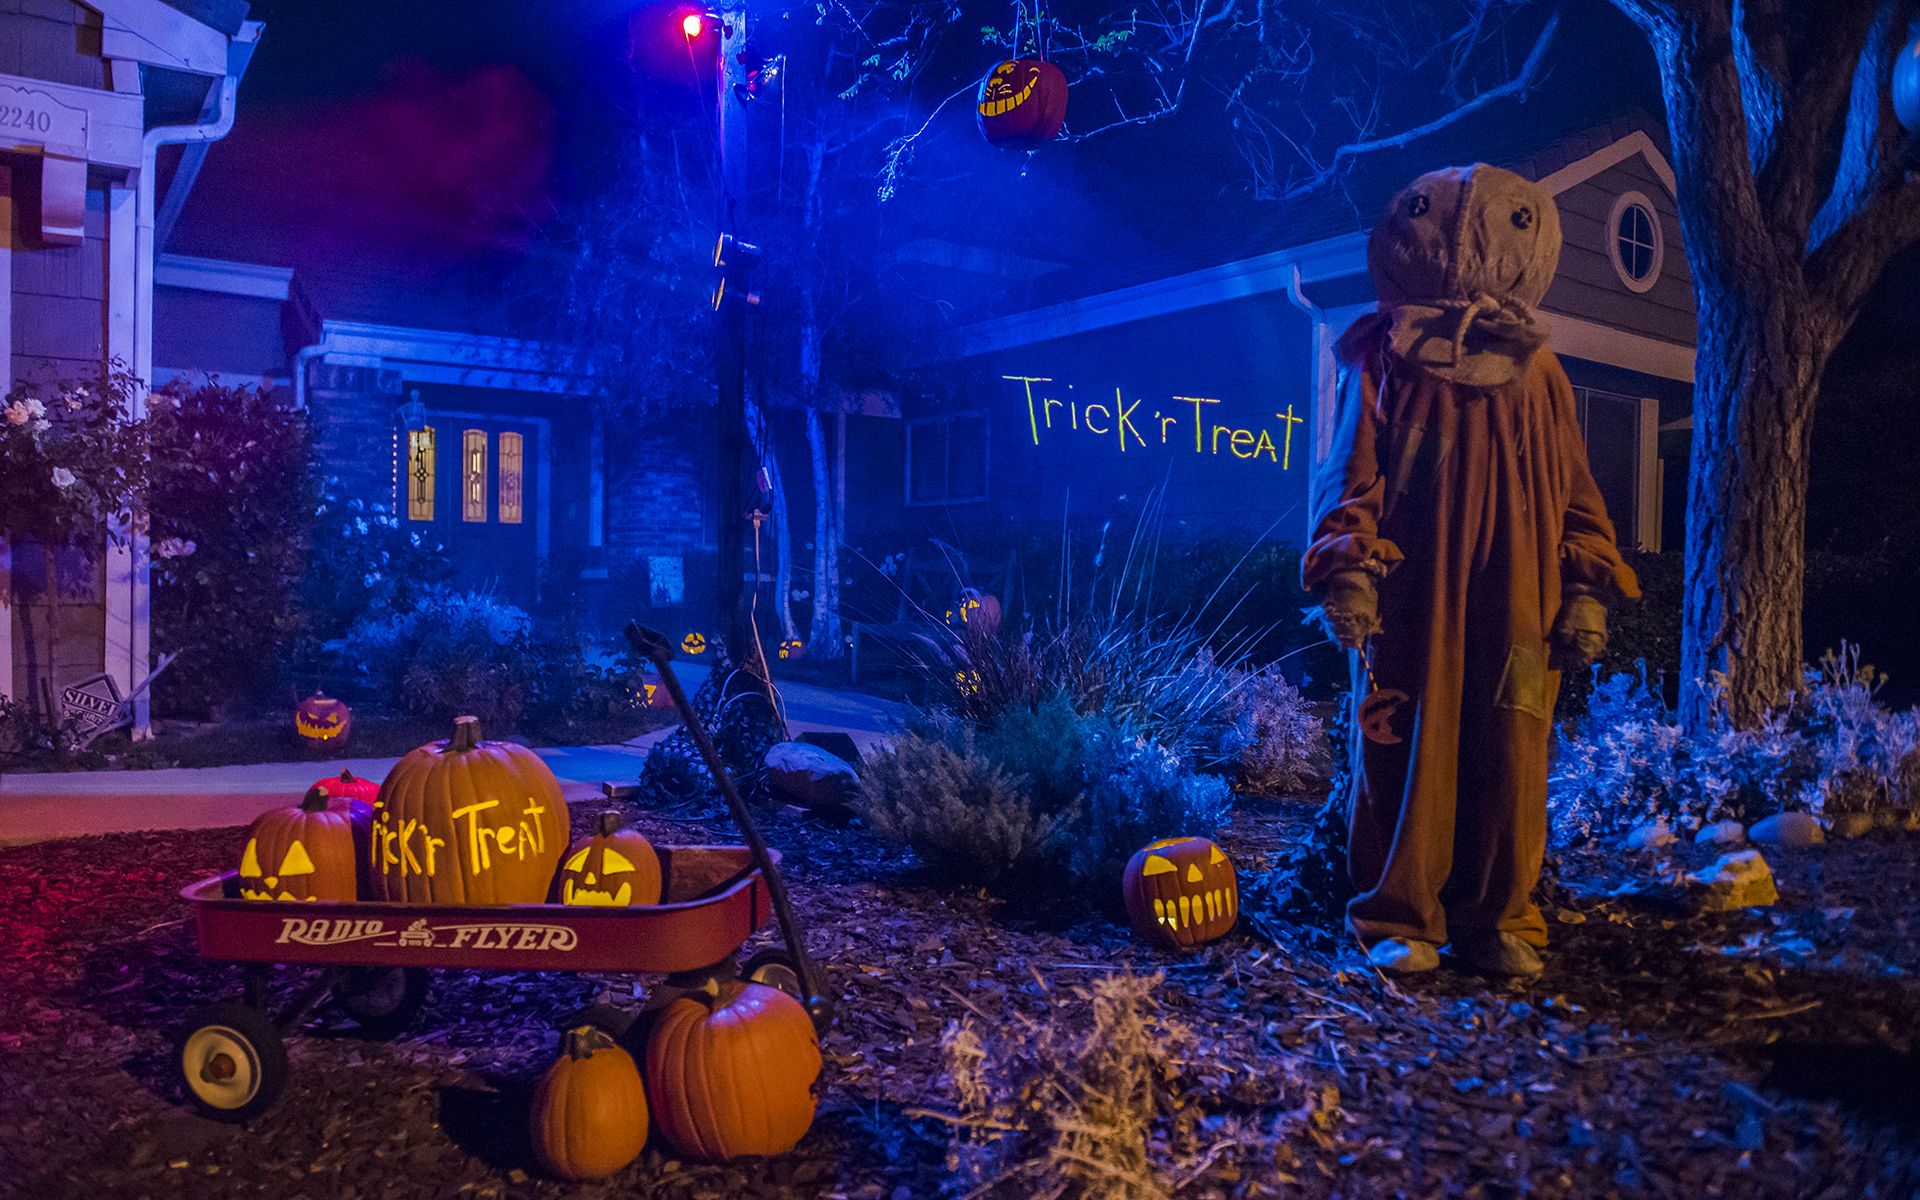 Murder House Productions presents Trick 'R Treat: 2017 Review.